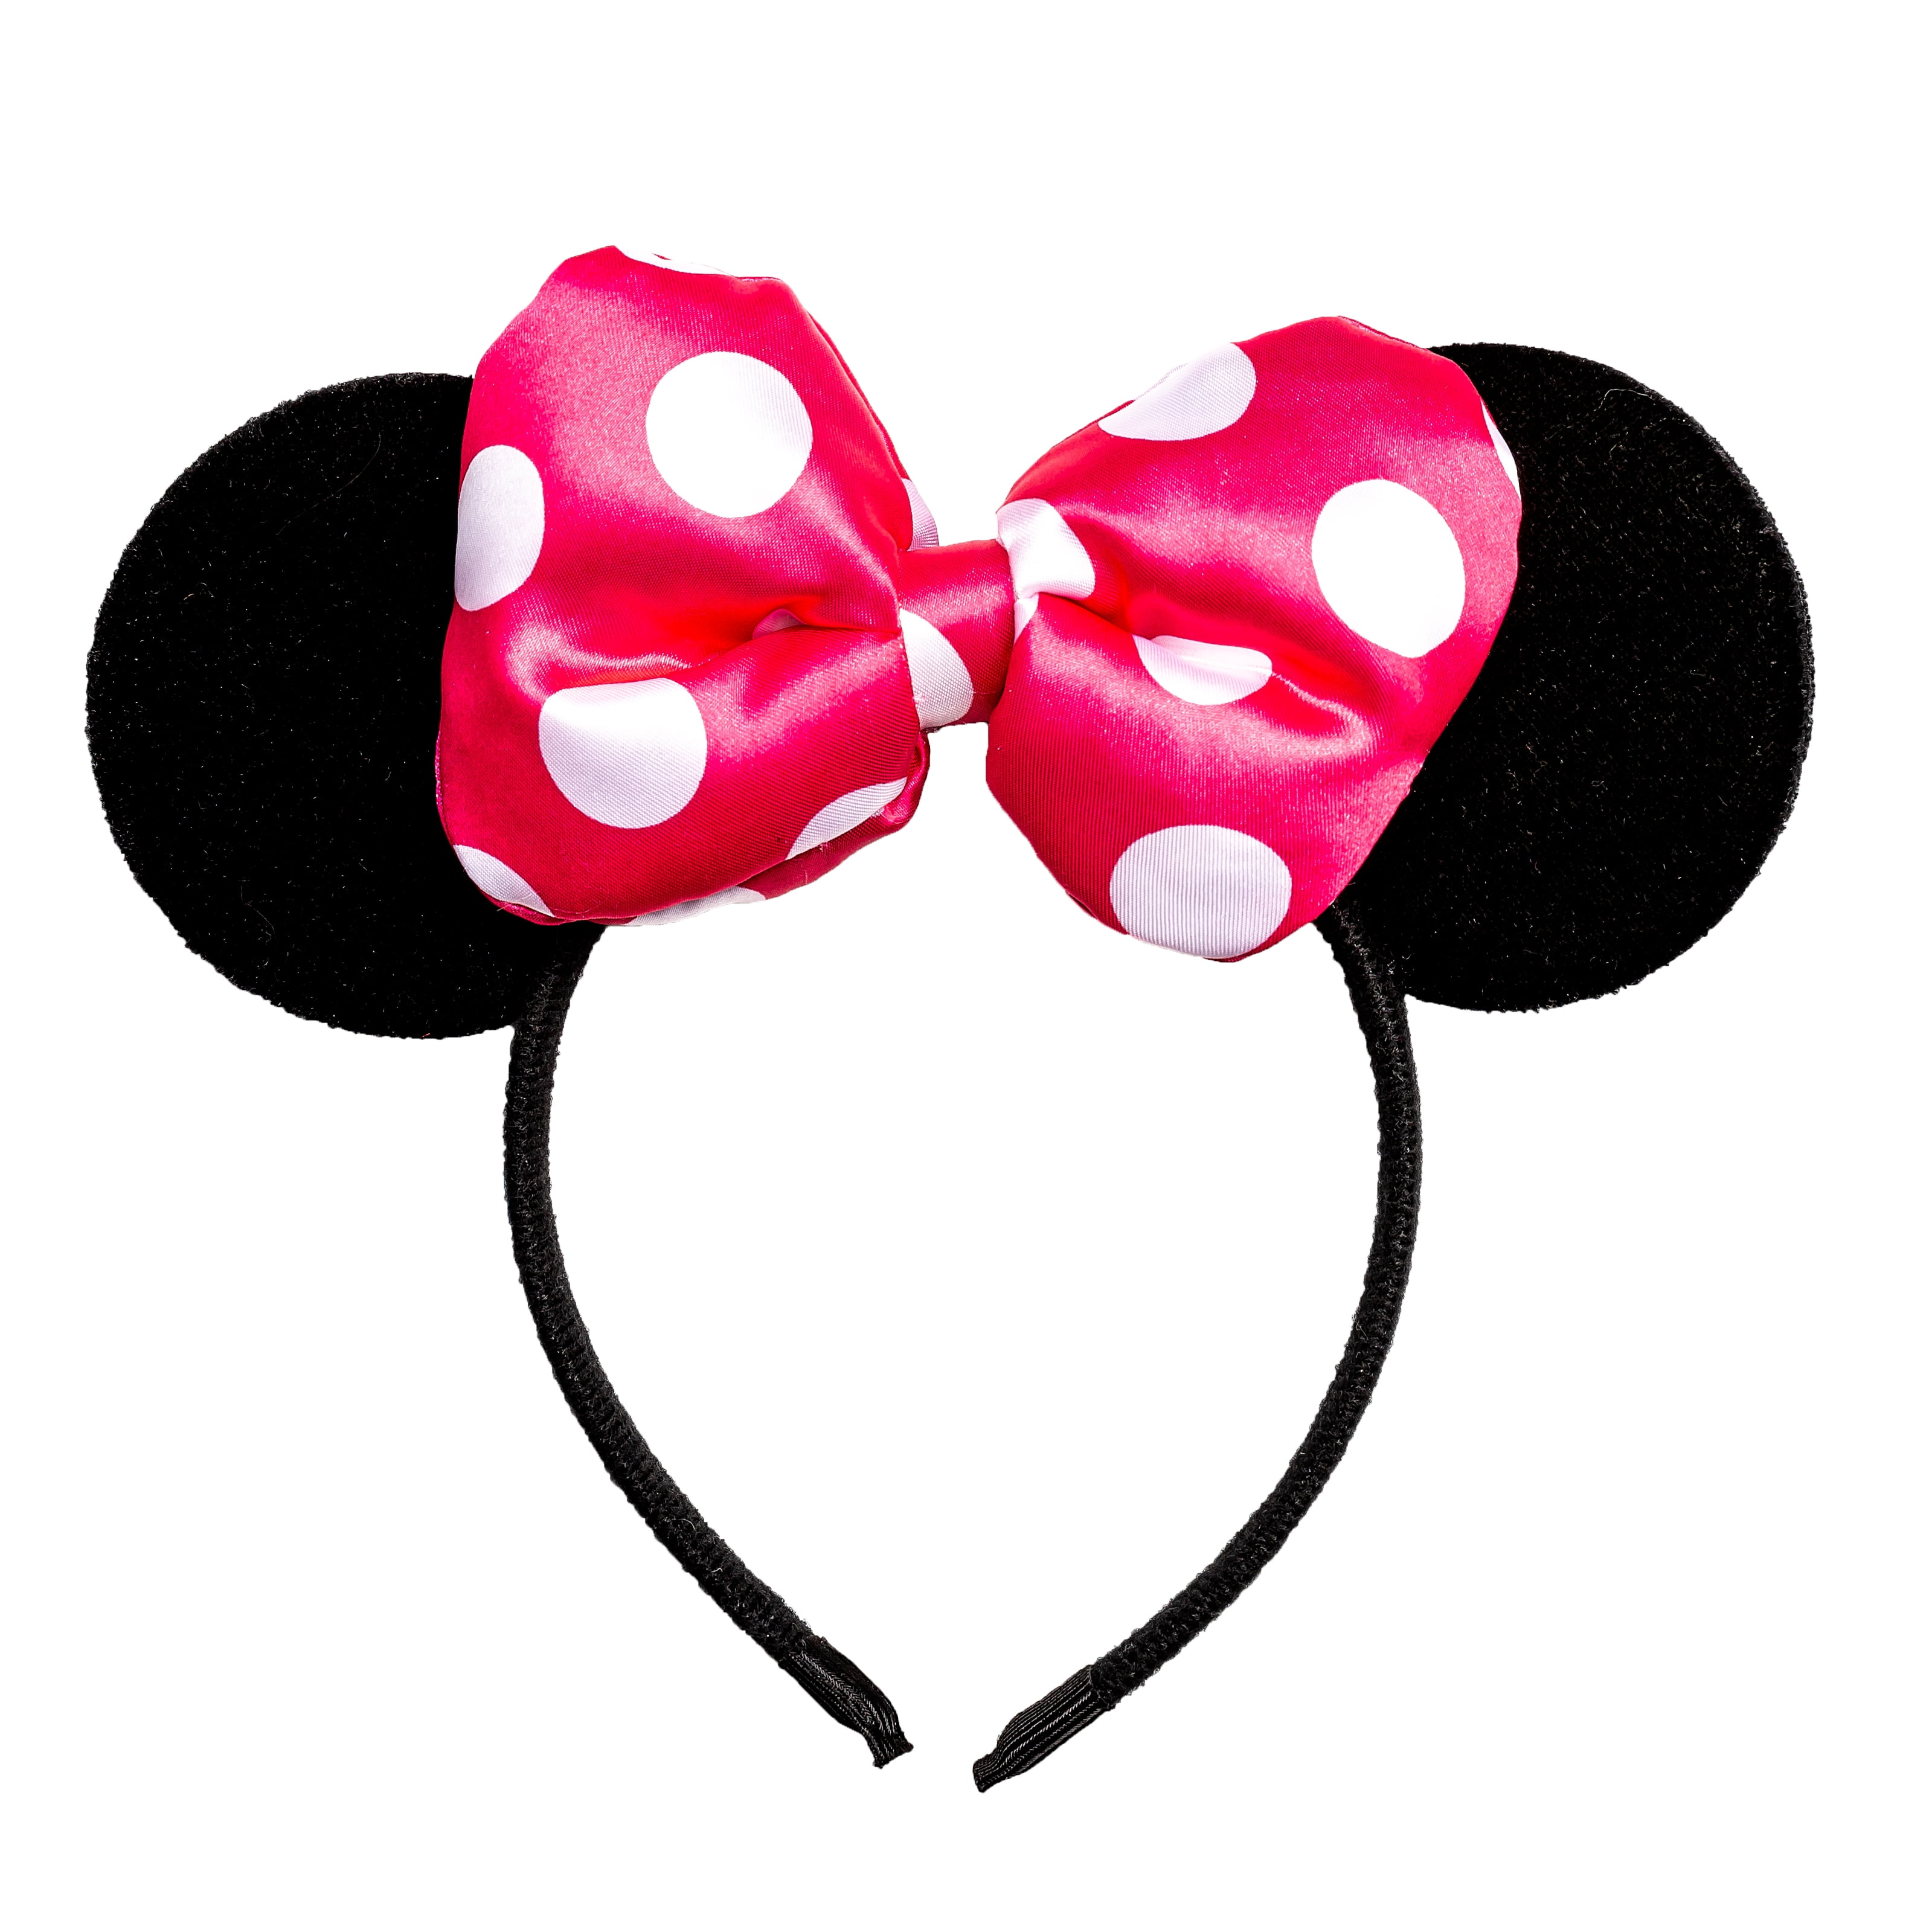 Red Polka Dot Bow Minnie Mouse Ears Headband Black Party Favors Costume Mickey